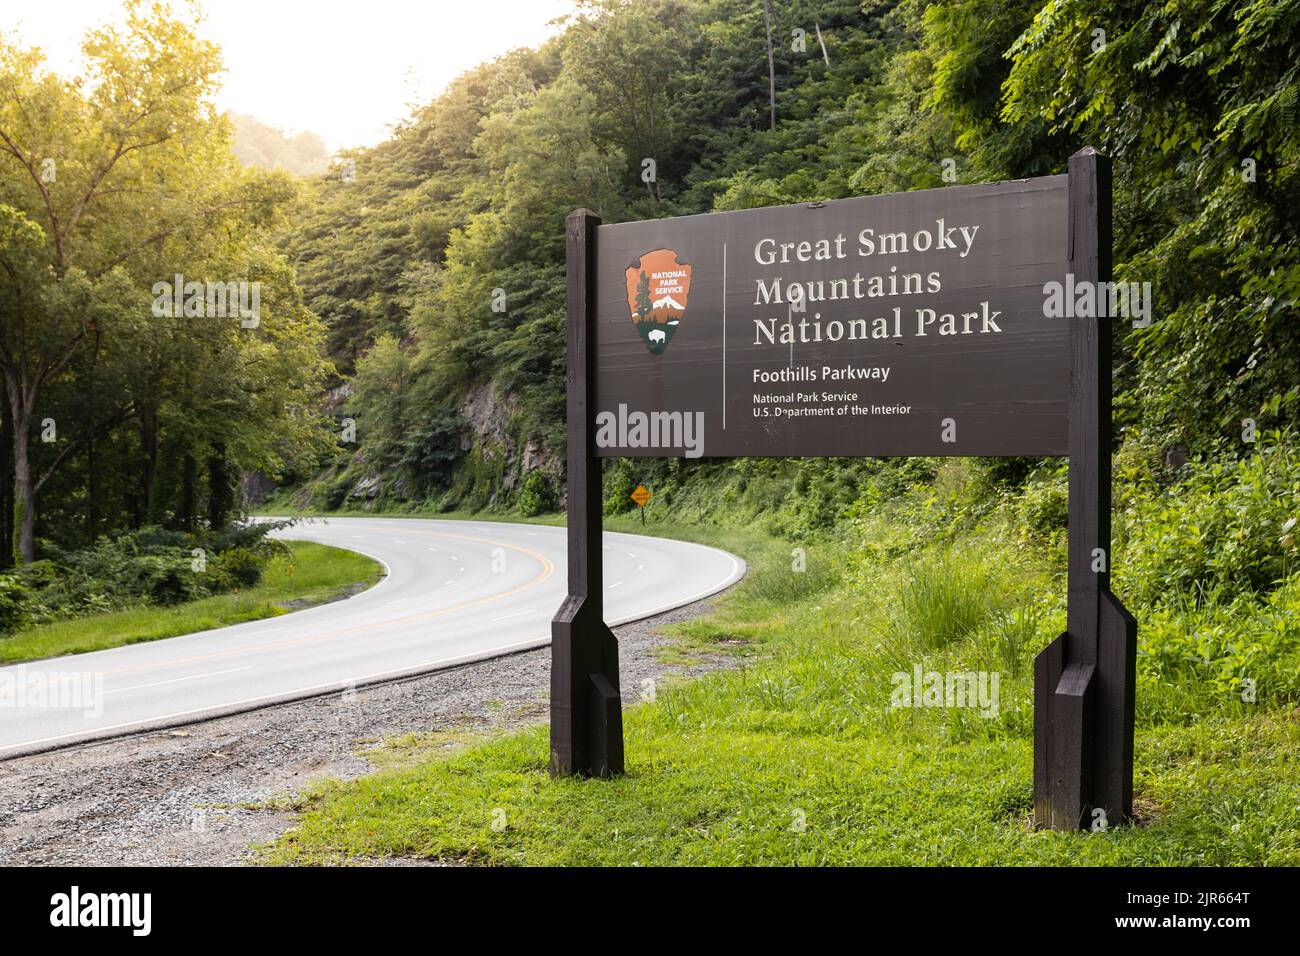 A Great Smoky Mountains National Park sign on the side of the road. Stock Photo